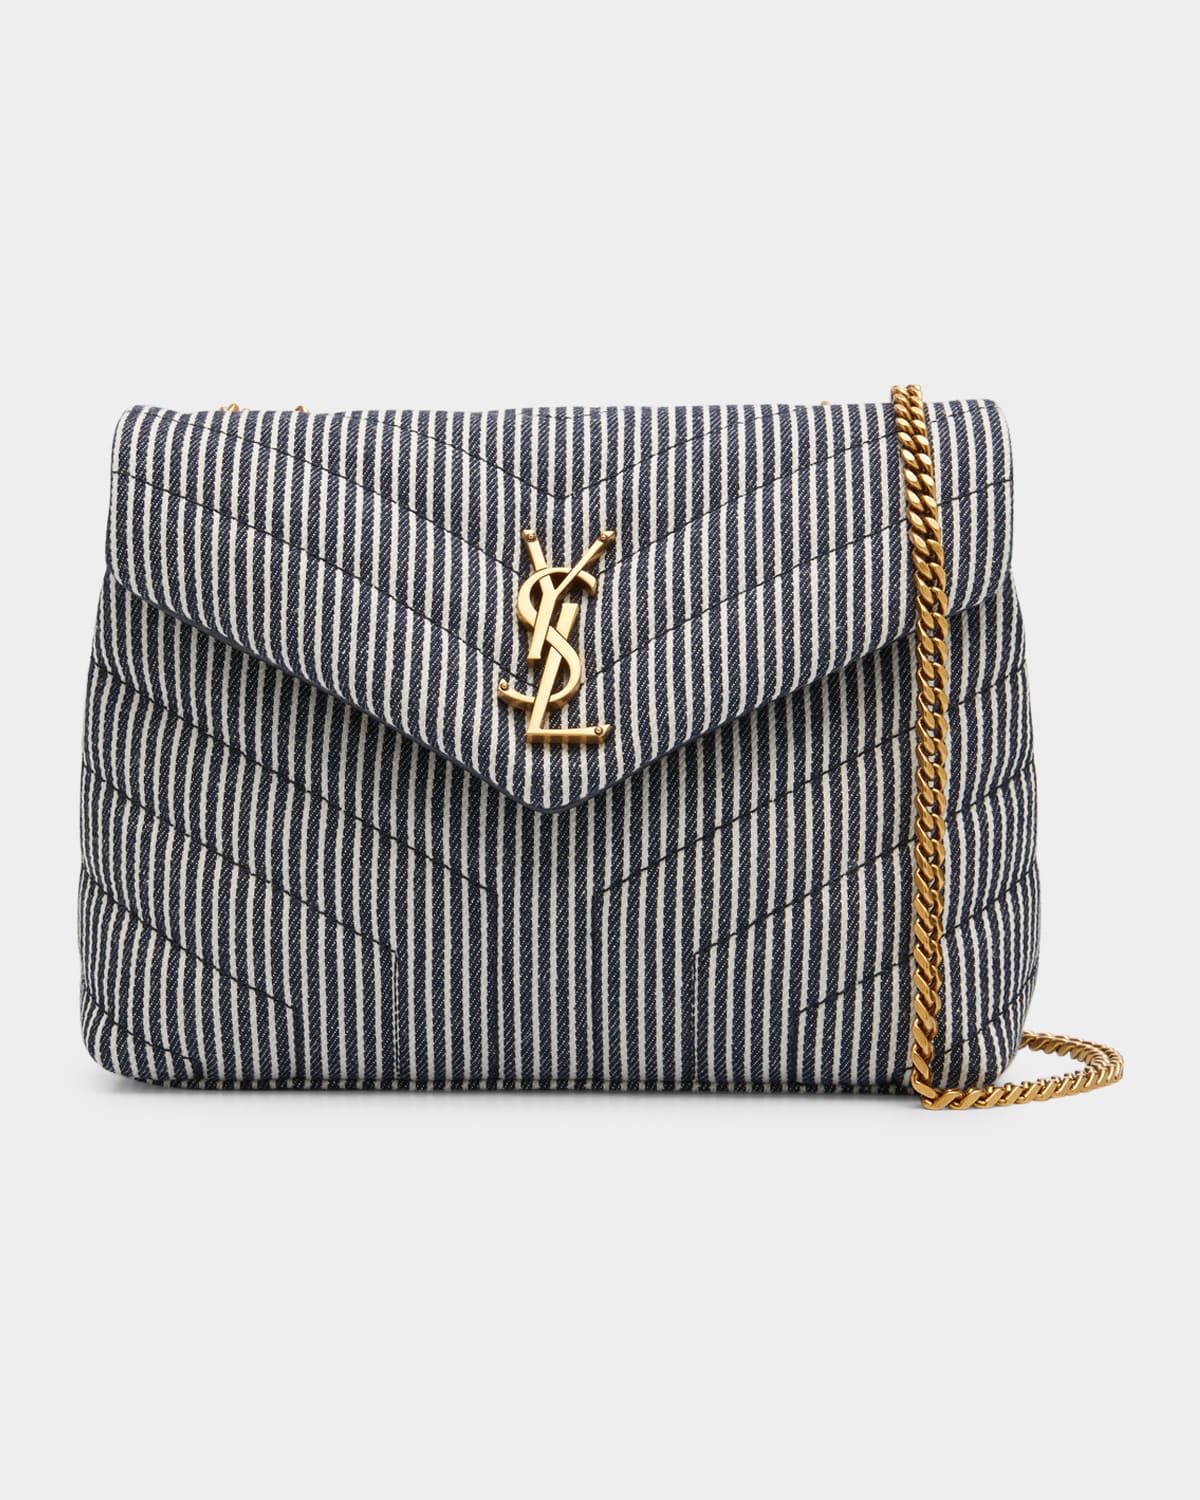 SAINT LAURENT LOULOU SMALL YSL SHOULDER BAG IN QUILTED STRIPPED DENIM